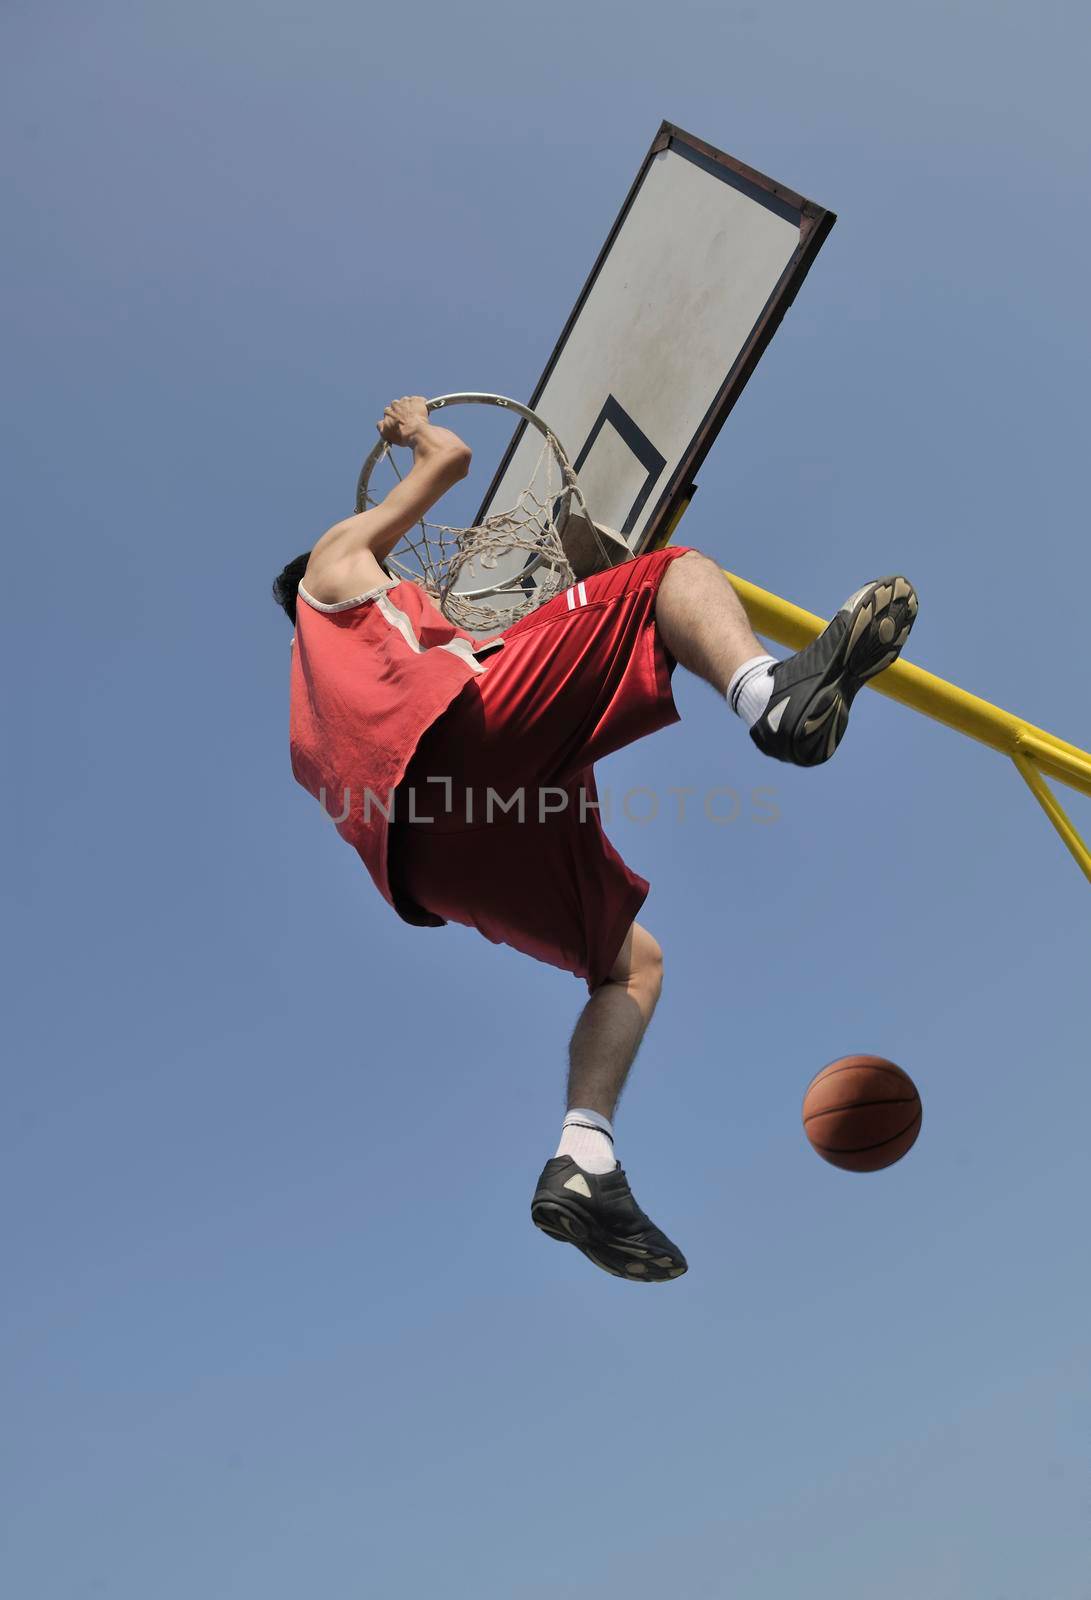 basketball player by dotshock